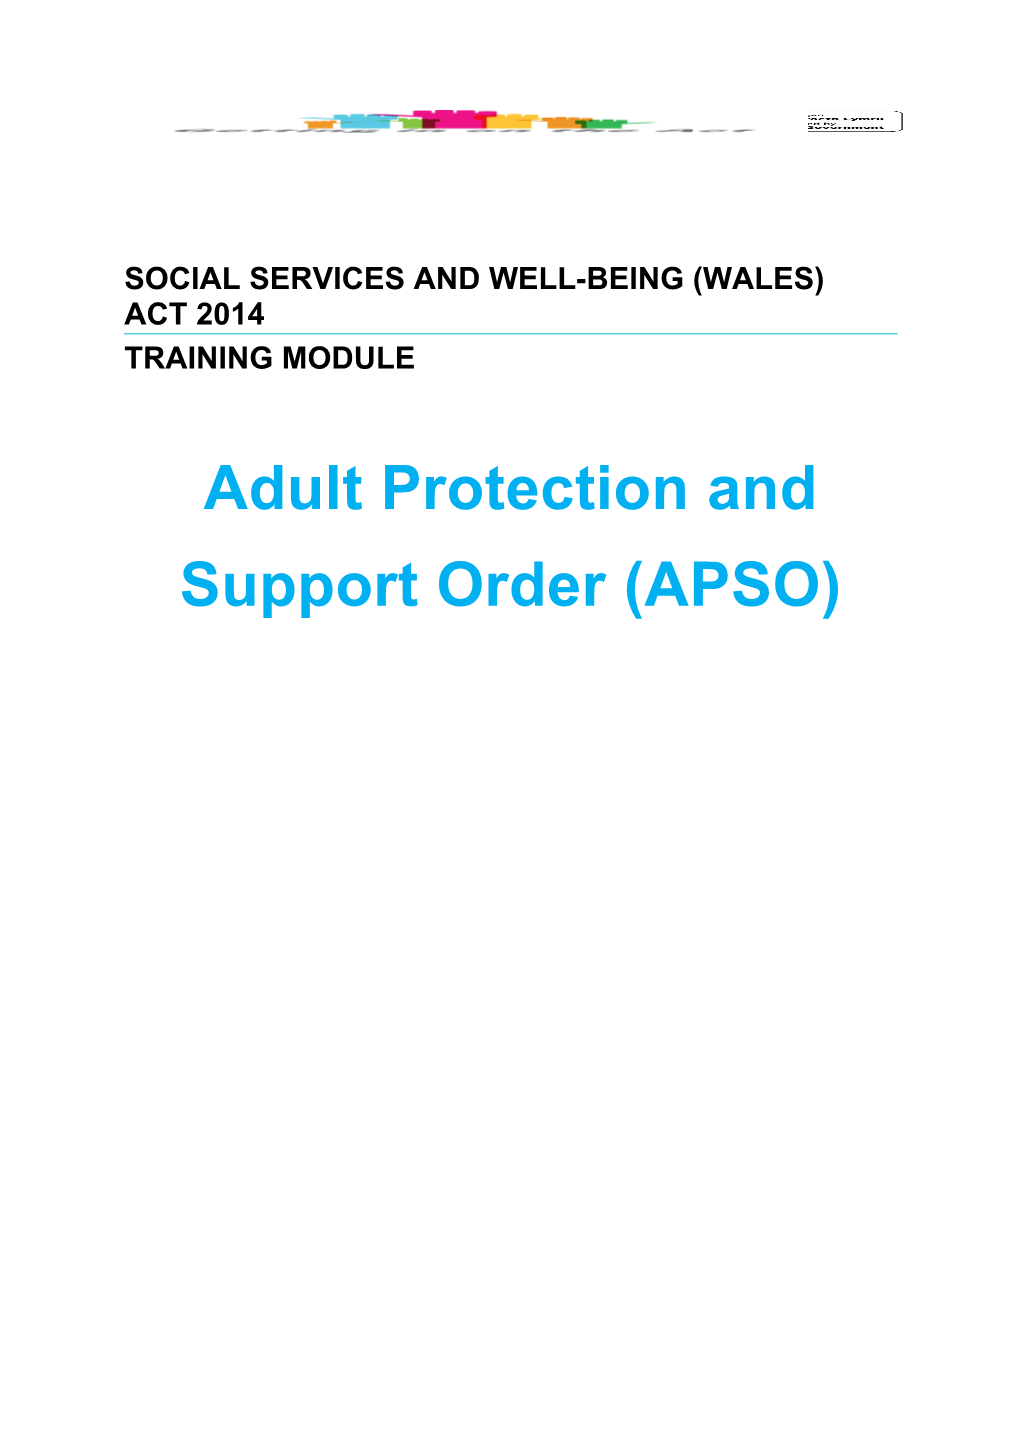 Social Services and Well-Being (Wales) Act 2014